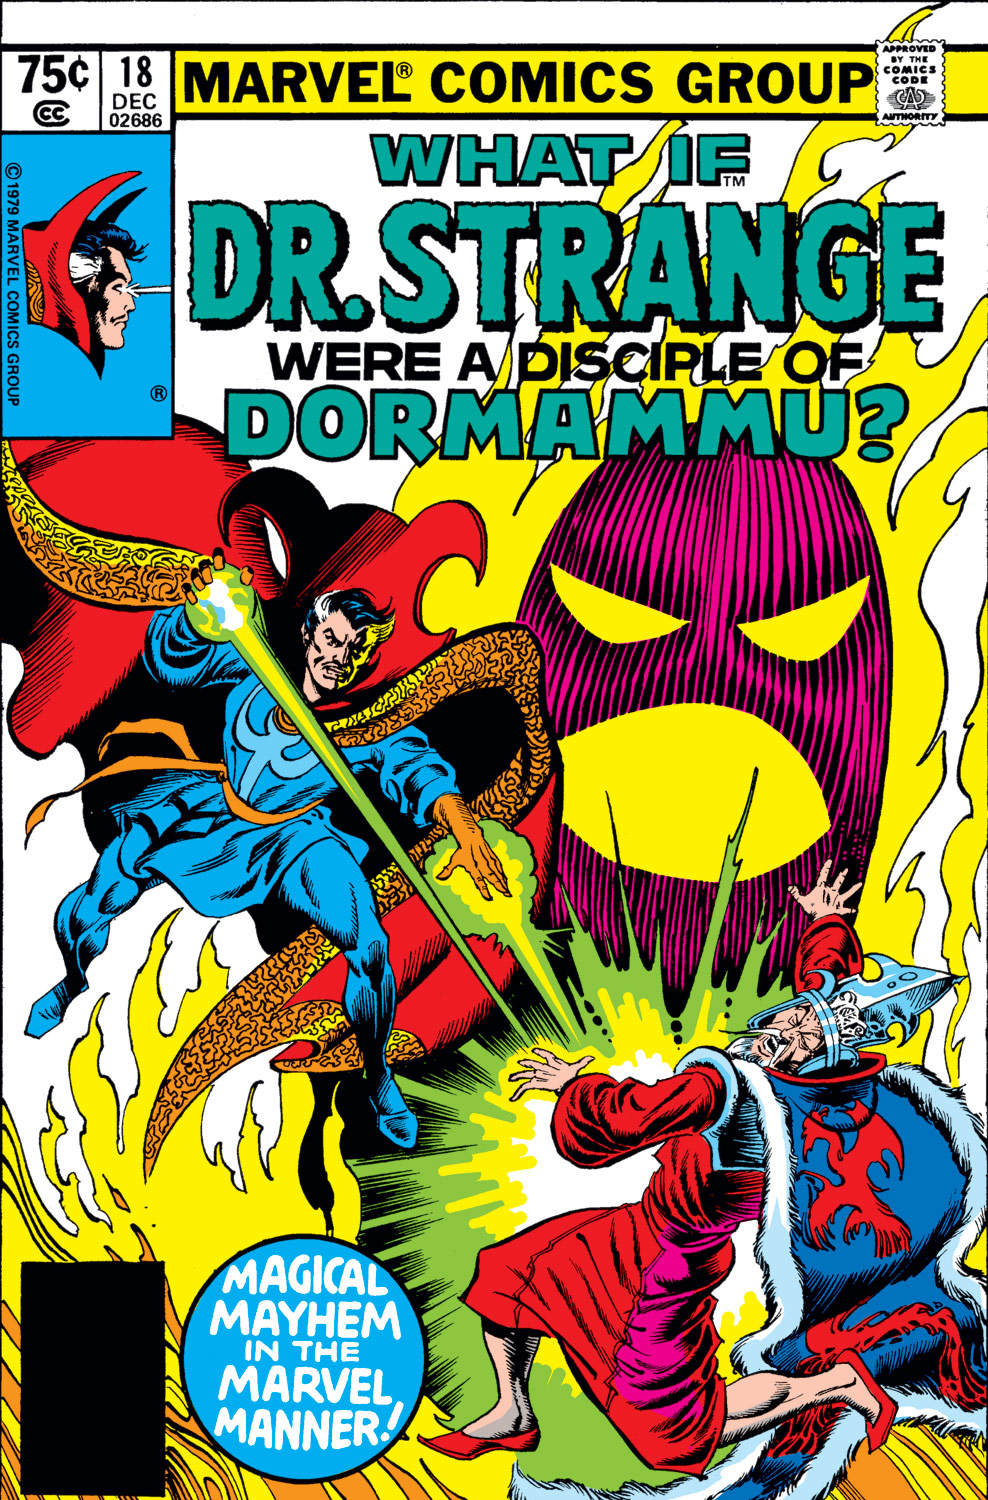 <{ $series->title }} issue 18 - Dr. Strange were a disciple of Dormammu - Page 1